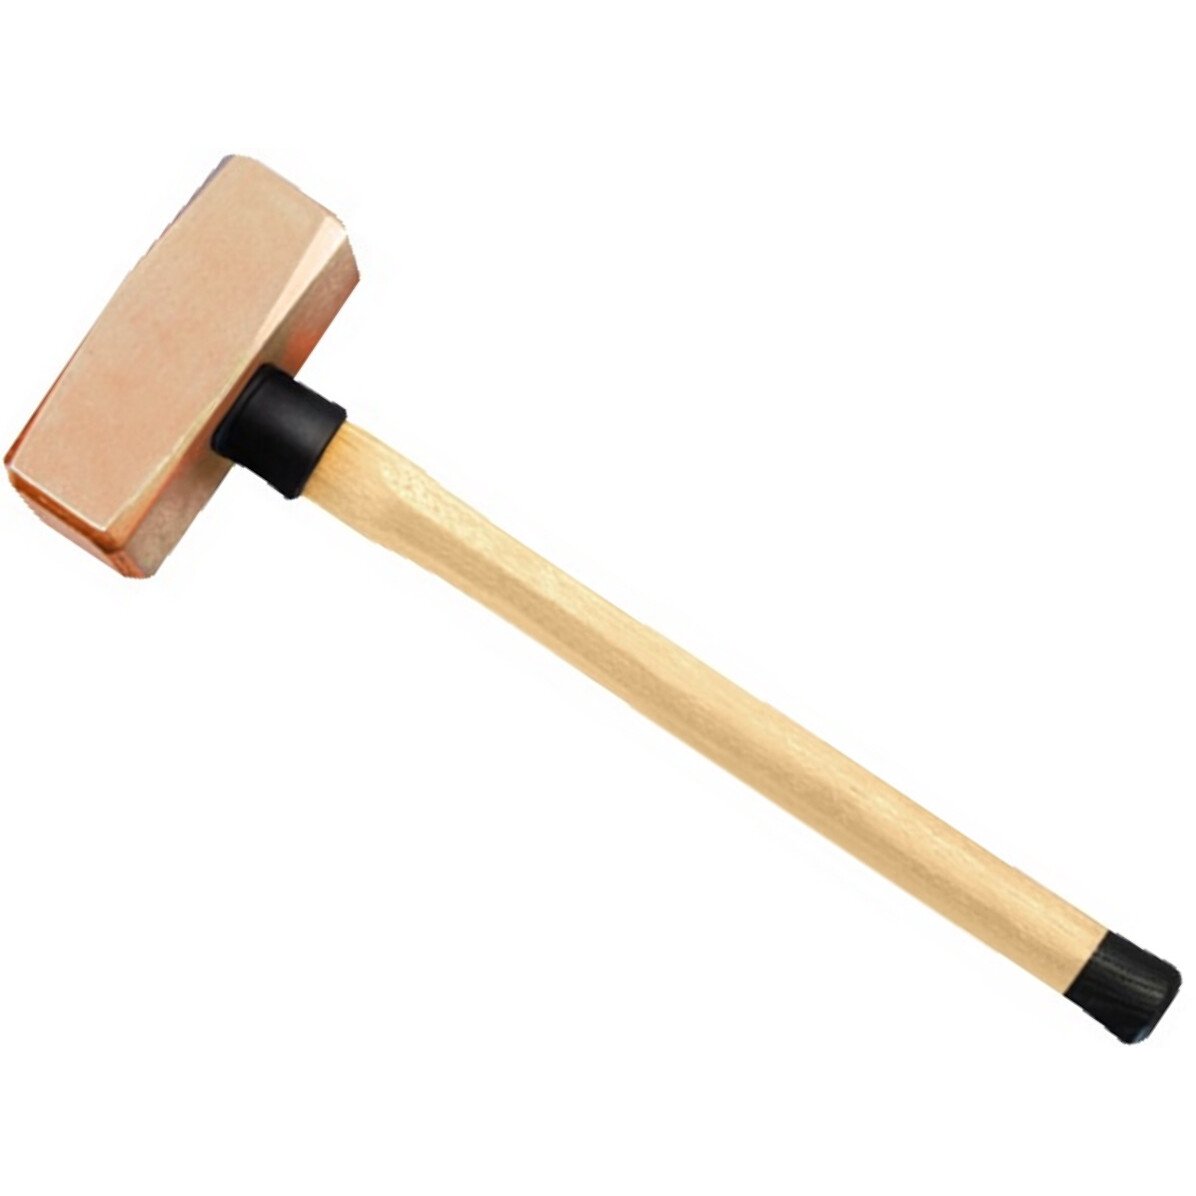 Bahco NSB500-2500 Non Sparking Copper Beryllium German Type Stoning Hammer with Hickory Handle 2.5kg